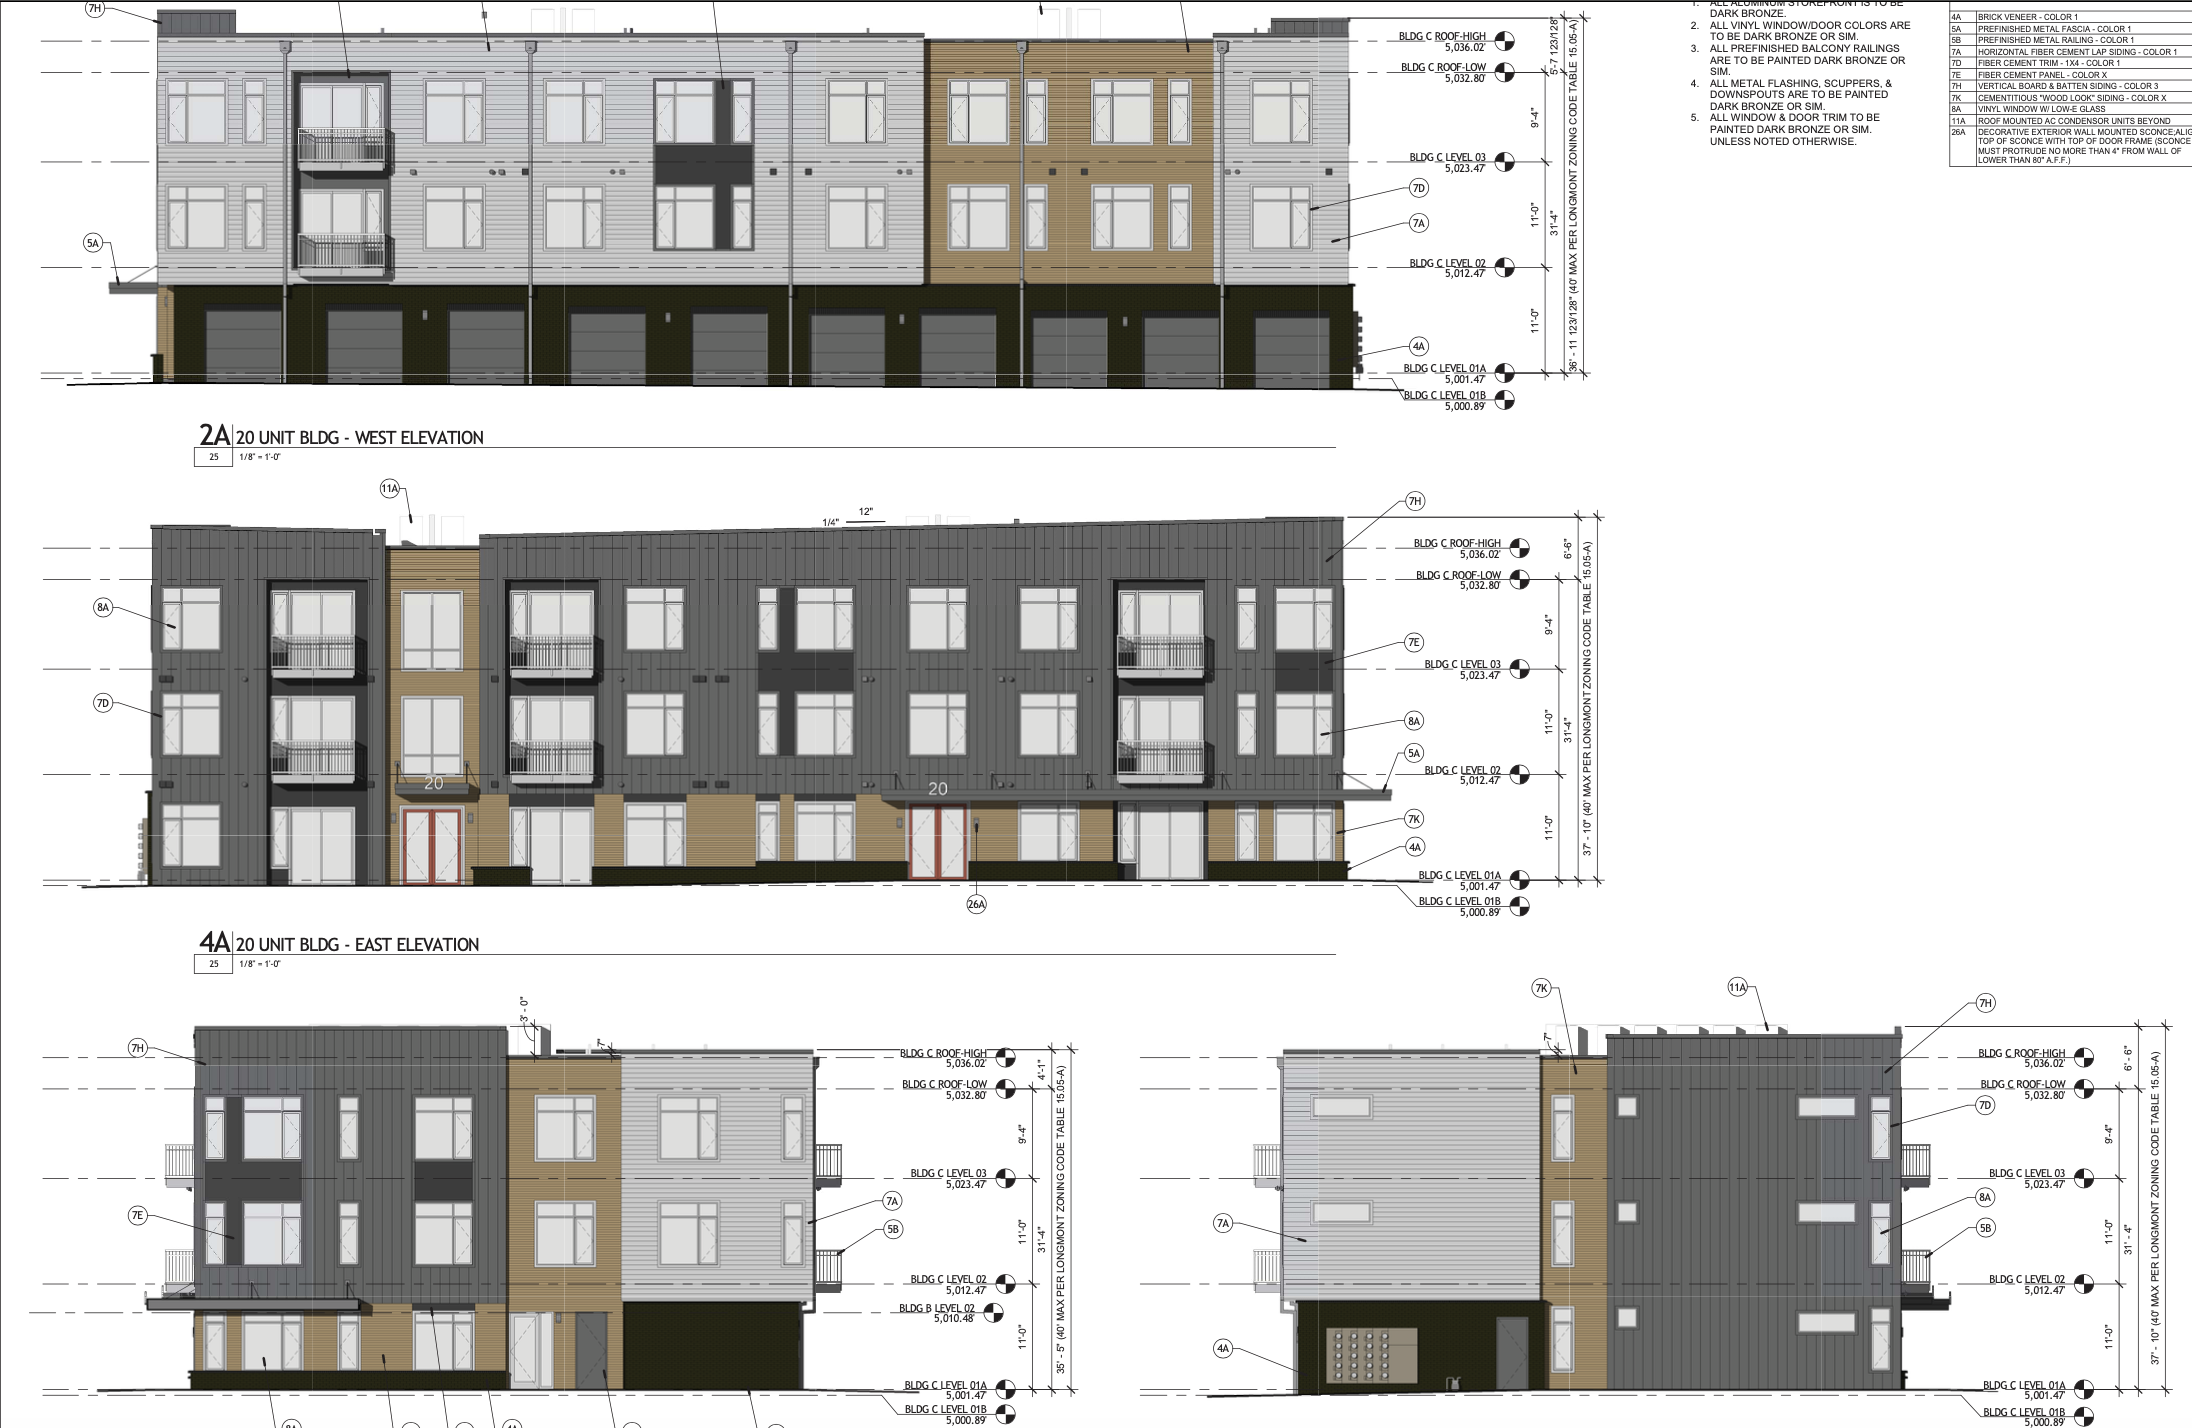 Exterior elevations for Creekside Multi-Family in Longmont, CO